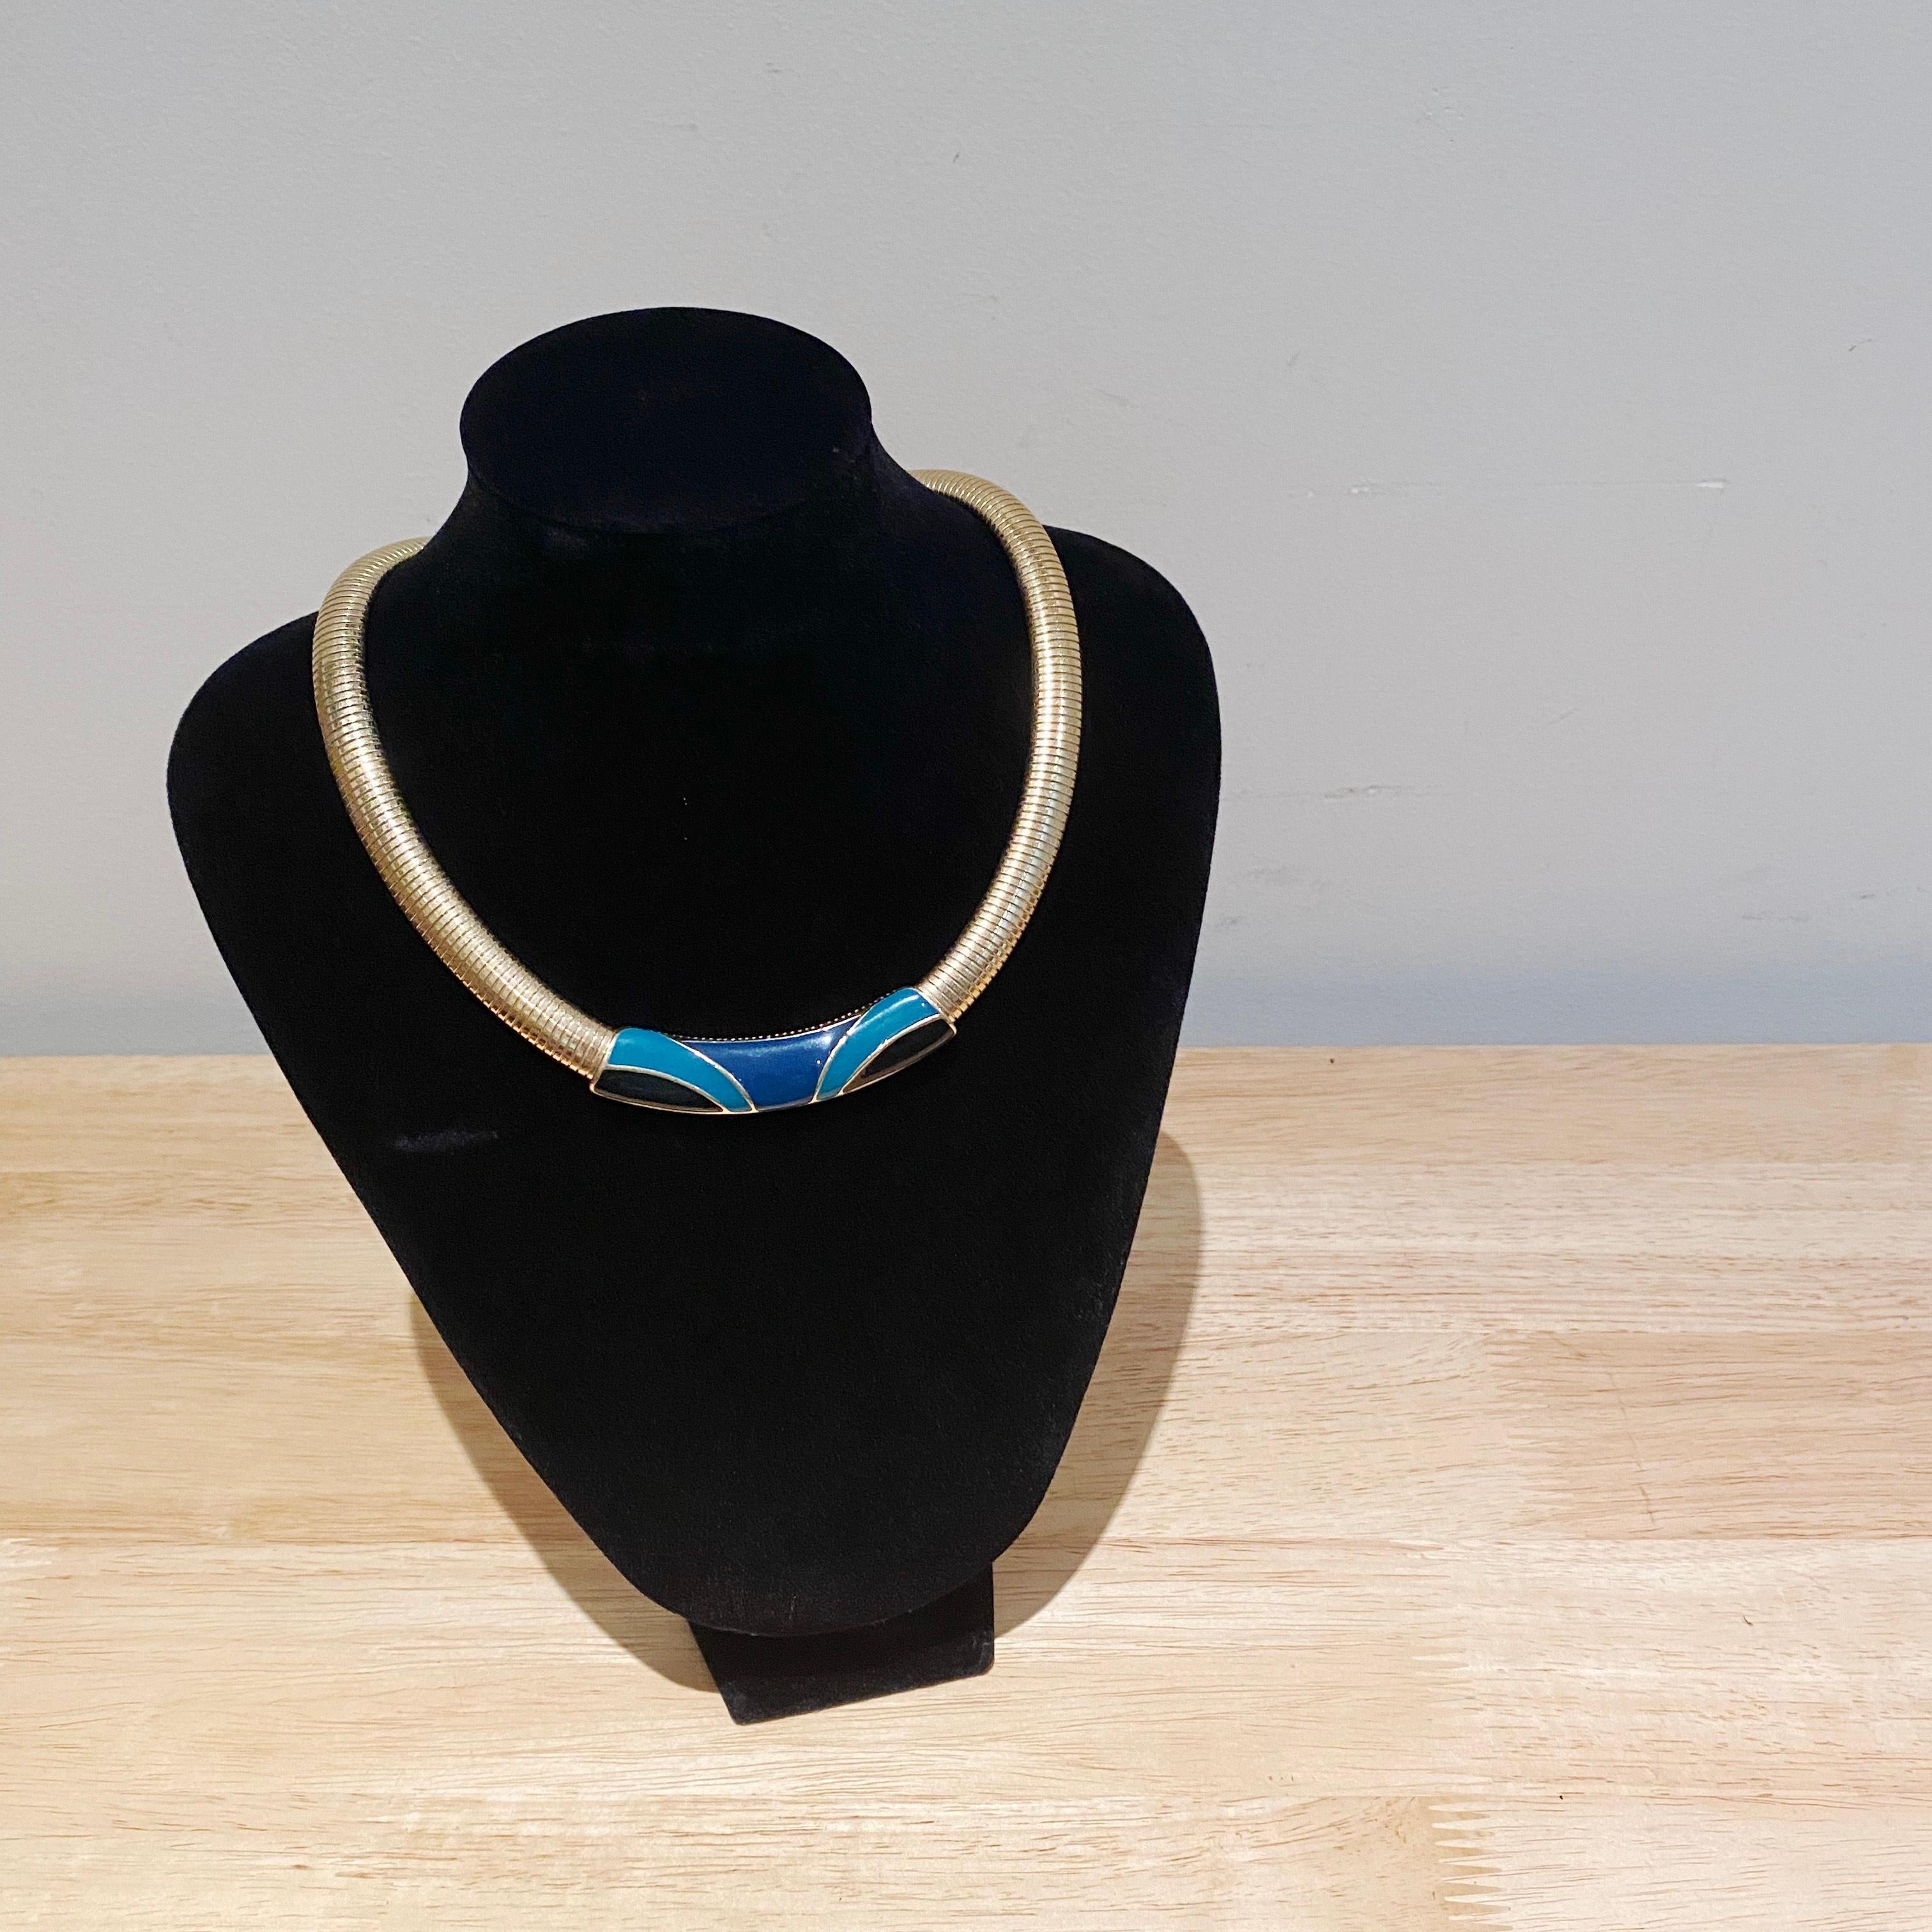 Sleek vintage 80s, Trifari choker style omega necklace. In good vintage condition. Easily styled with contemporary clothing trends. 